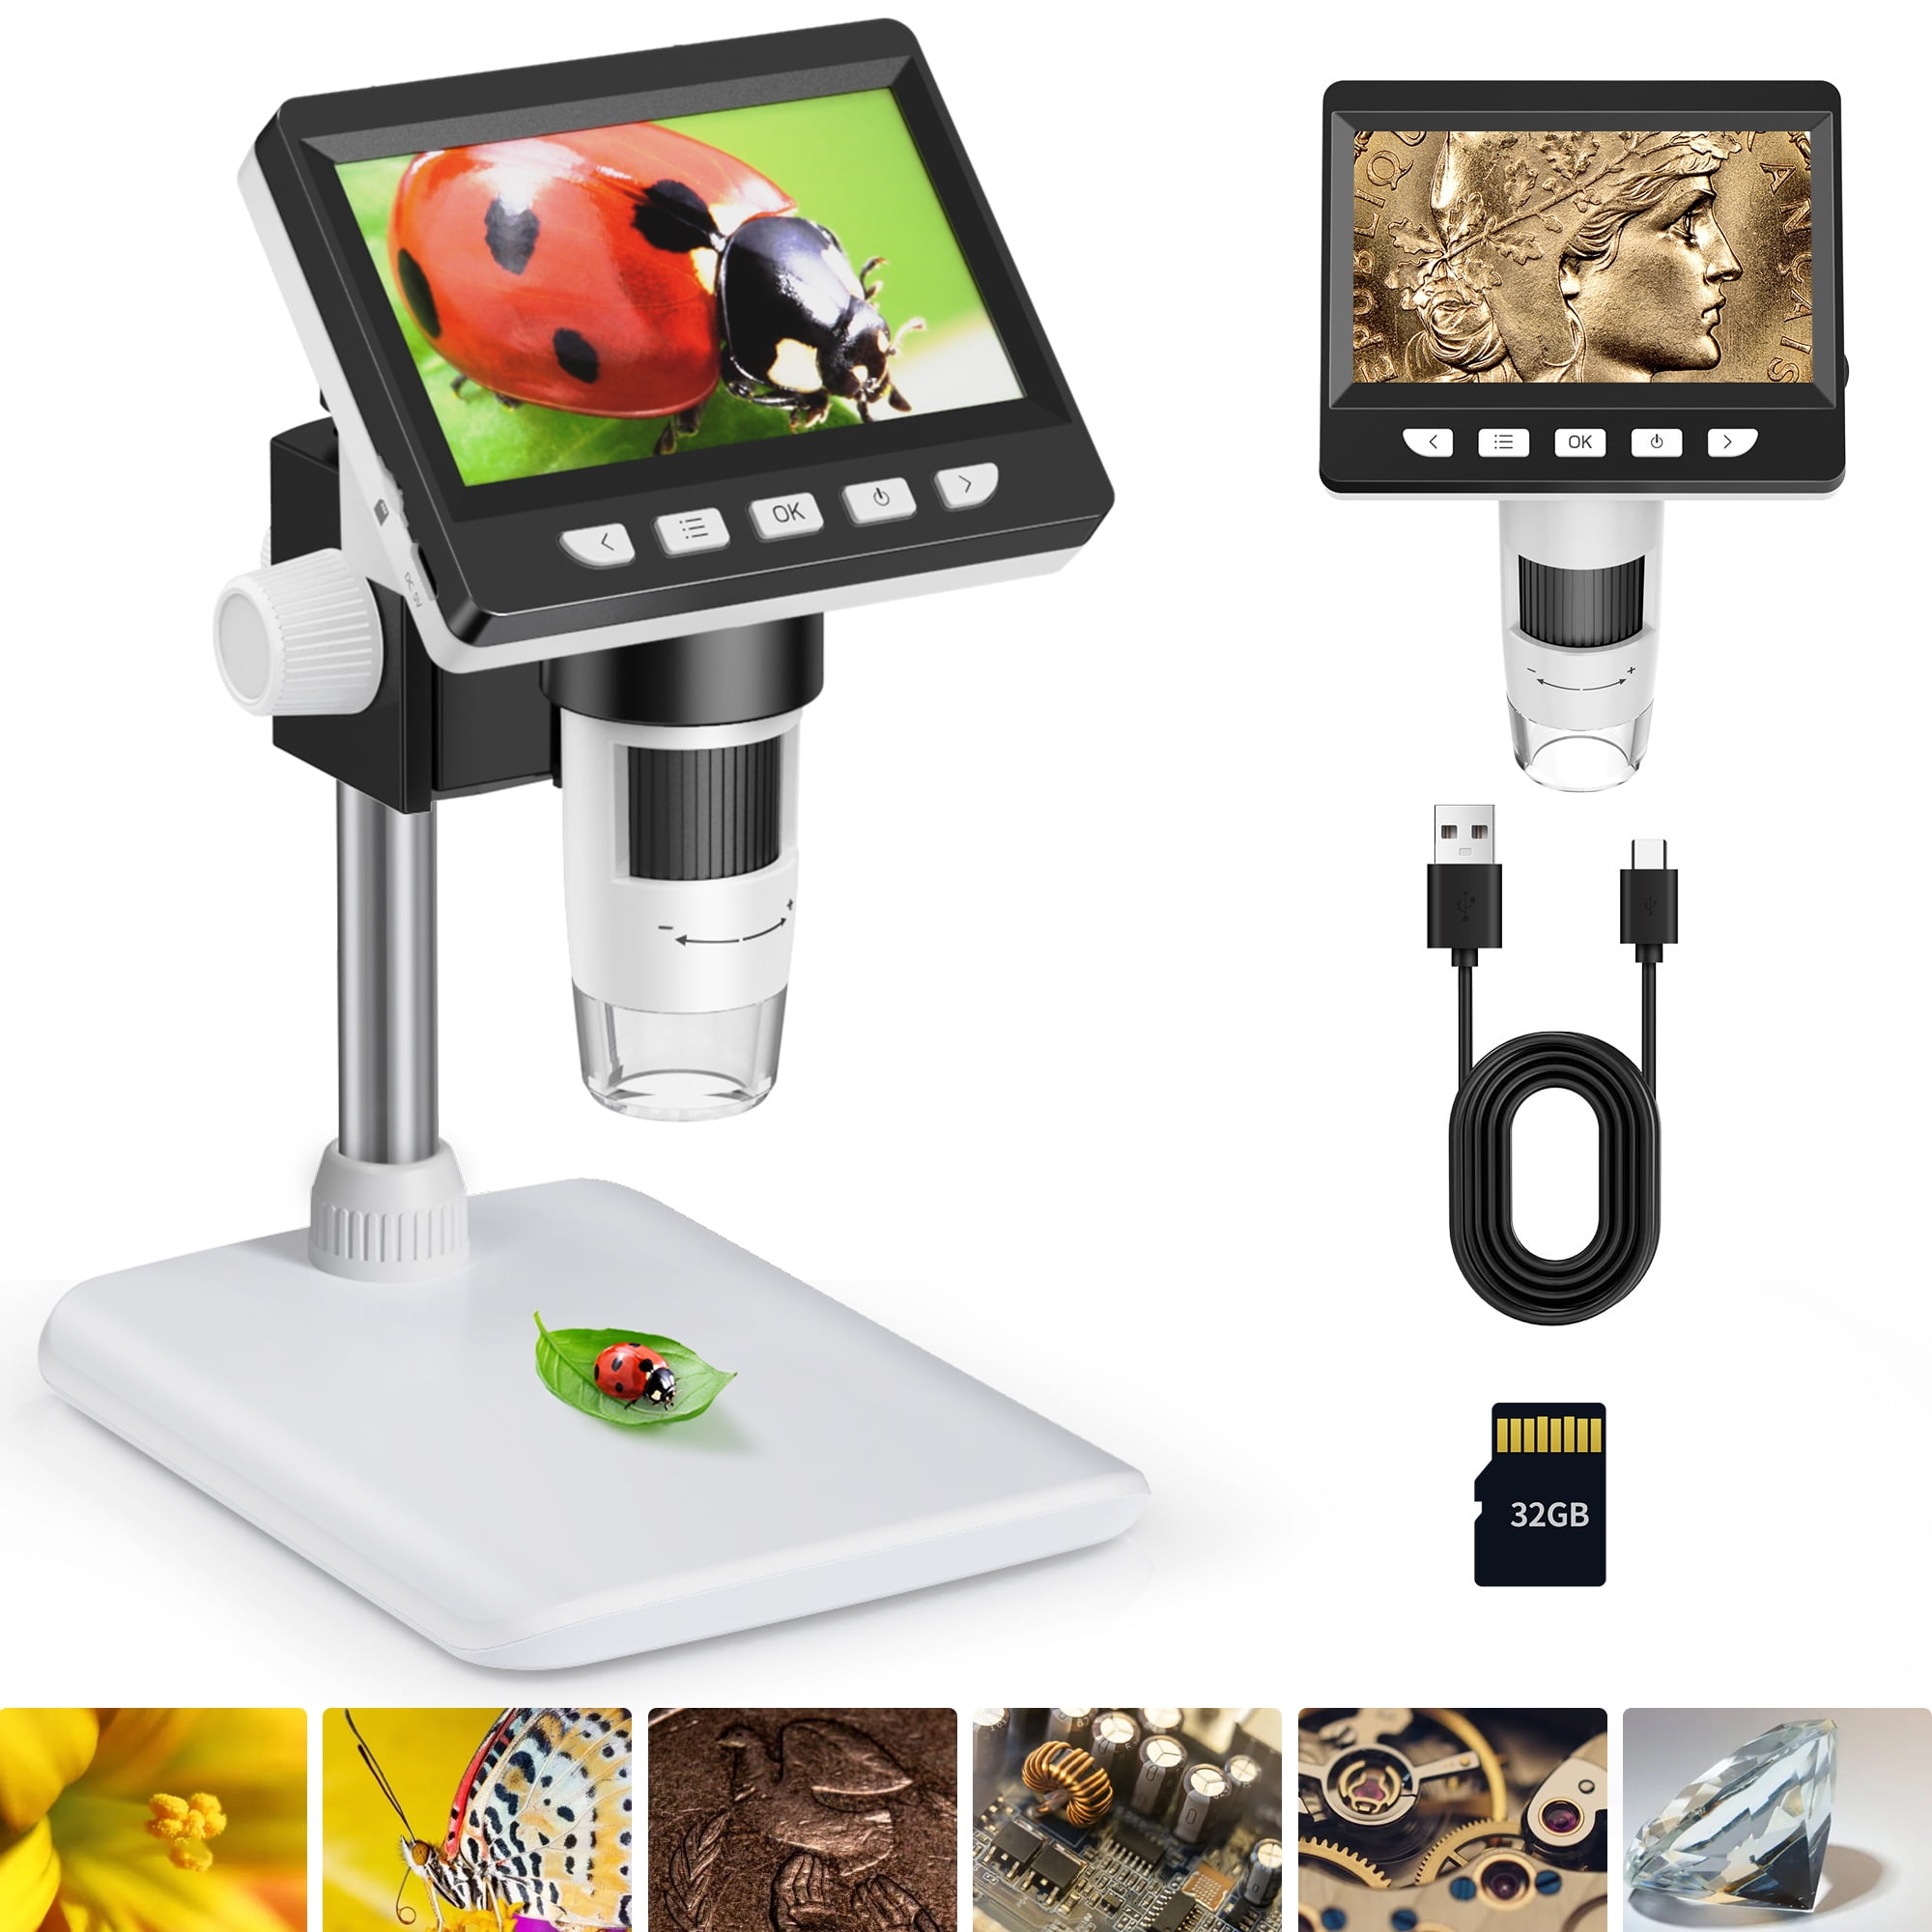 XClifes 4.3 inch LCD Digital Microscope, Coin Microscope Handheld USB  Microscope 50X-1000X Magnification Video Camera with 8 Adjustable LED  Lights for Adults PCB Soldering DM4